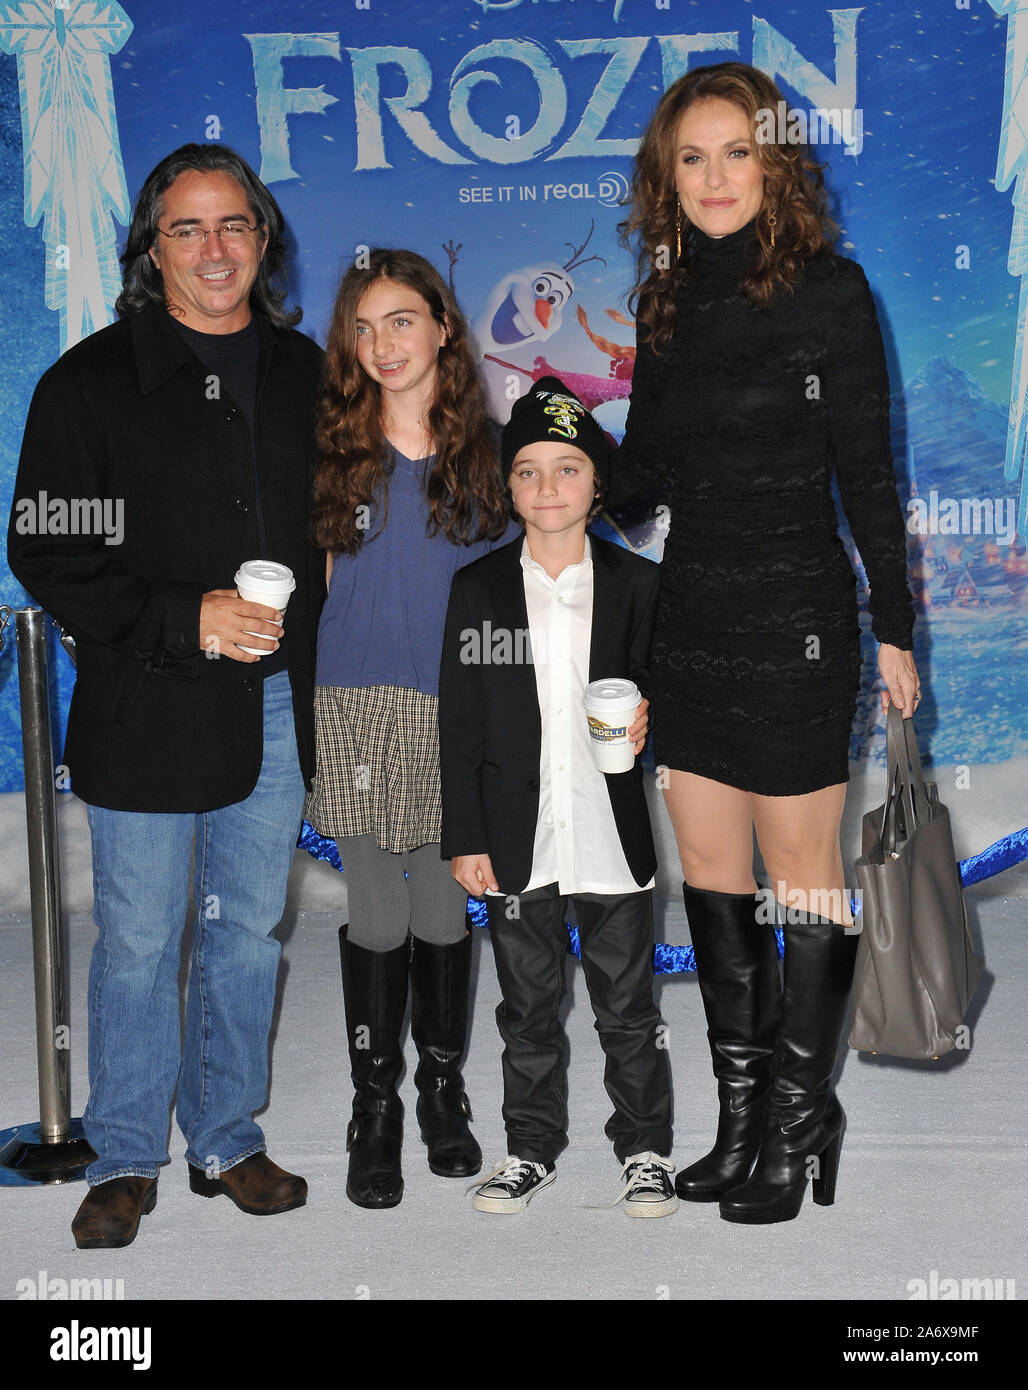 LOS ANGELES, CA - NOVEMBER 19, 2013: Amy Brenneman & husband Brad Silberling & children at the premiere of Disney's 'Frozen' at the El Capitan Theatre, Hollywood. Picture: Paul Smith / Featureflash Stock Photo